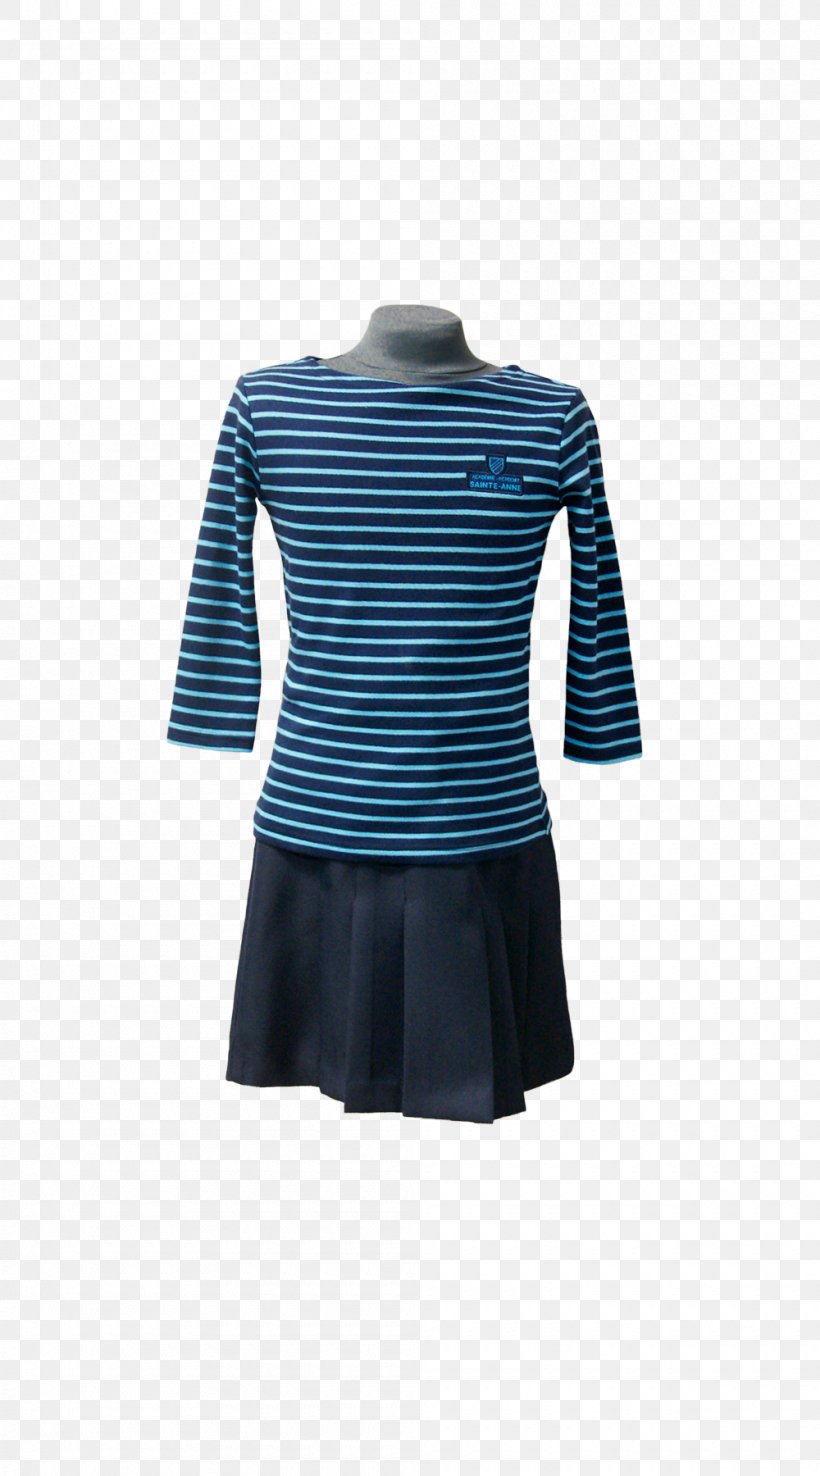 Uniform Clothing T-shirt Sleeve Dress, PNG, 1000x1800px, Uniform, Academy, Academy Is, Academy Sainteanne, Addition Download Free